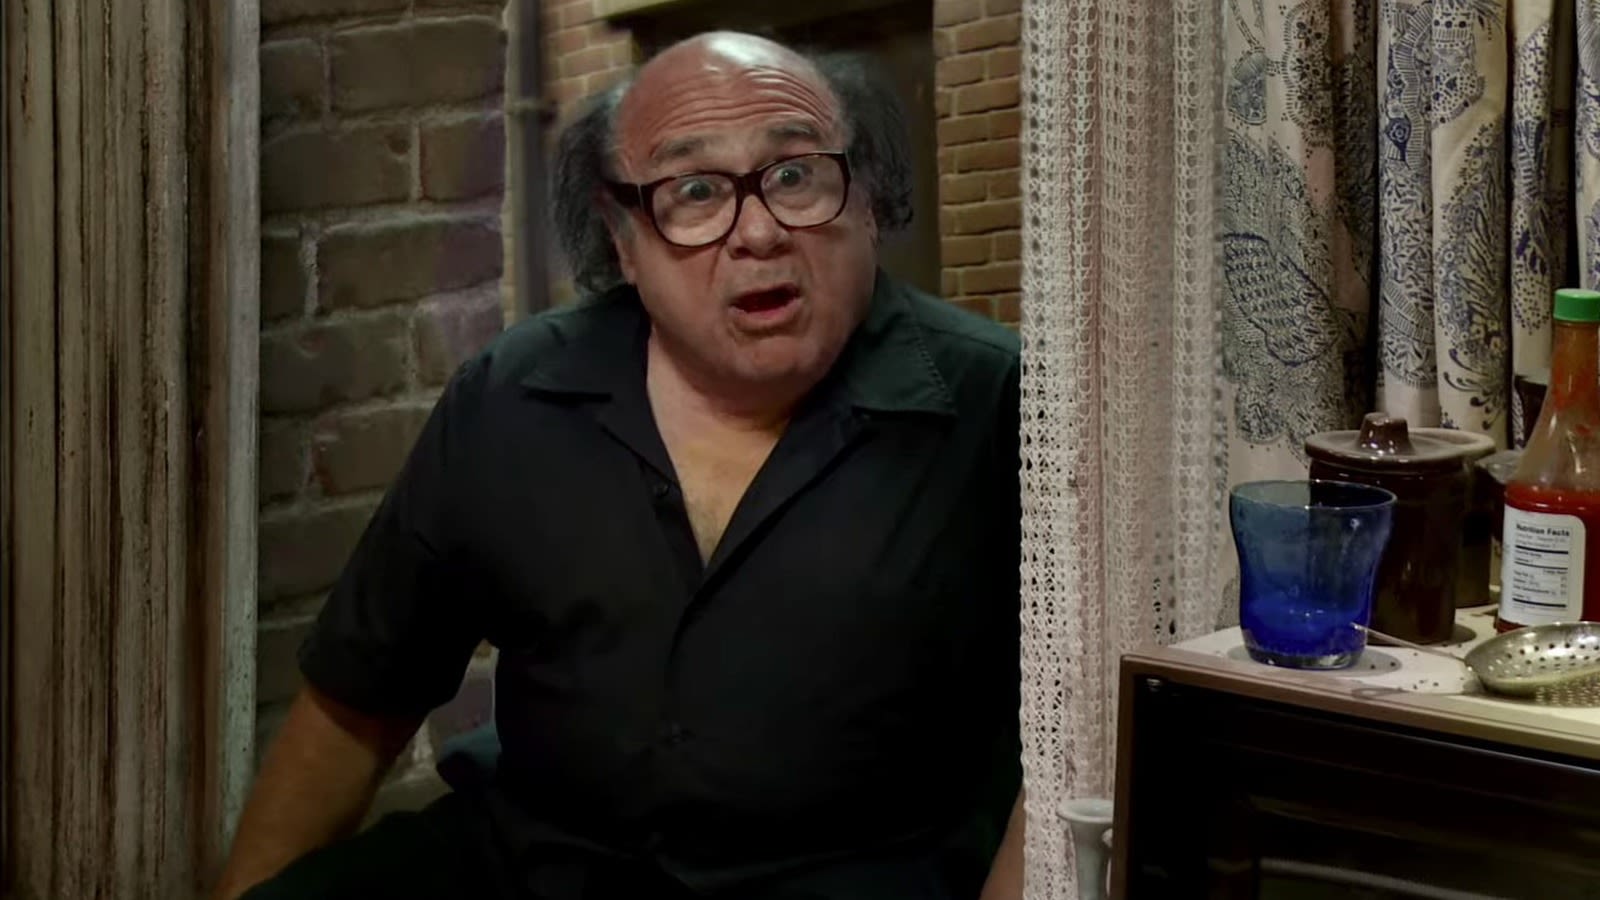 One Of Danny DeVito's Fondest Always Sunny Moments Involved Falling Out A Window - SlashFilm